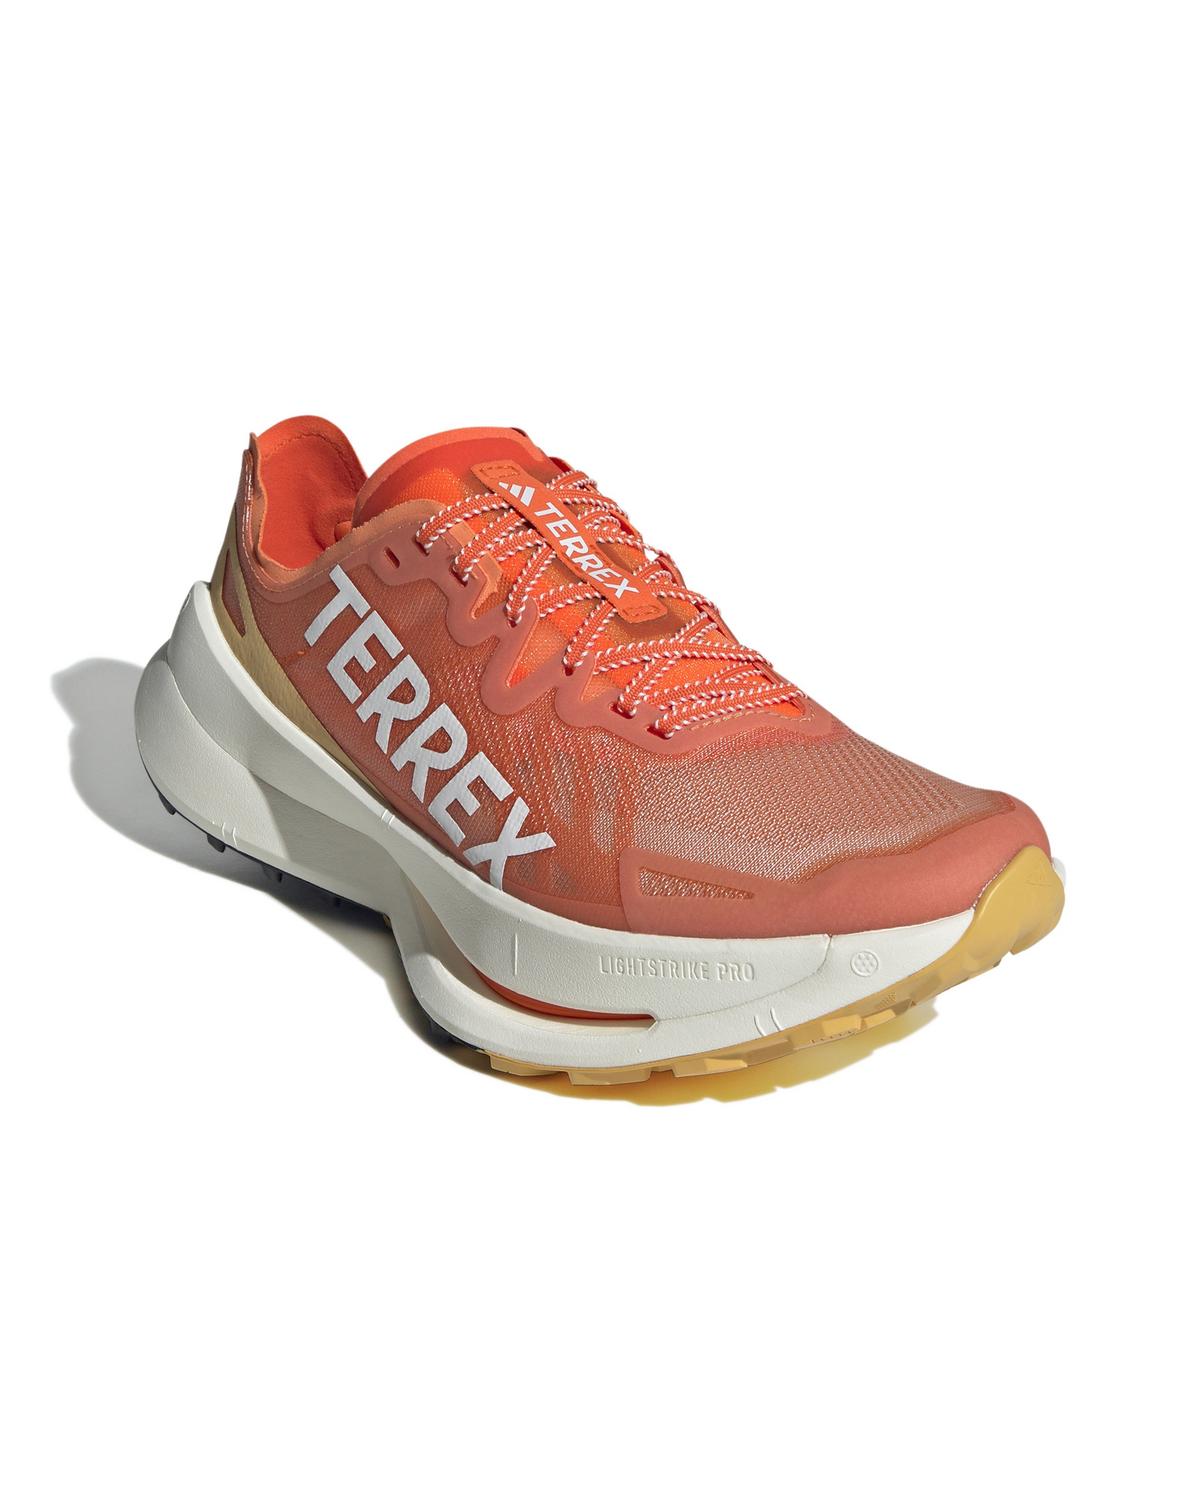 Adidas Men’s Terrex Agravic Speed Ultra Trail Running Shoes -  Coral